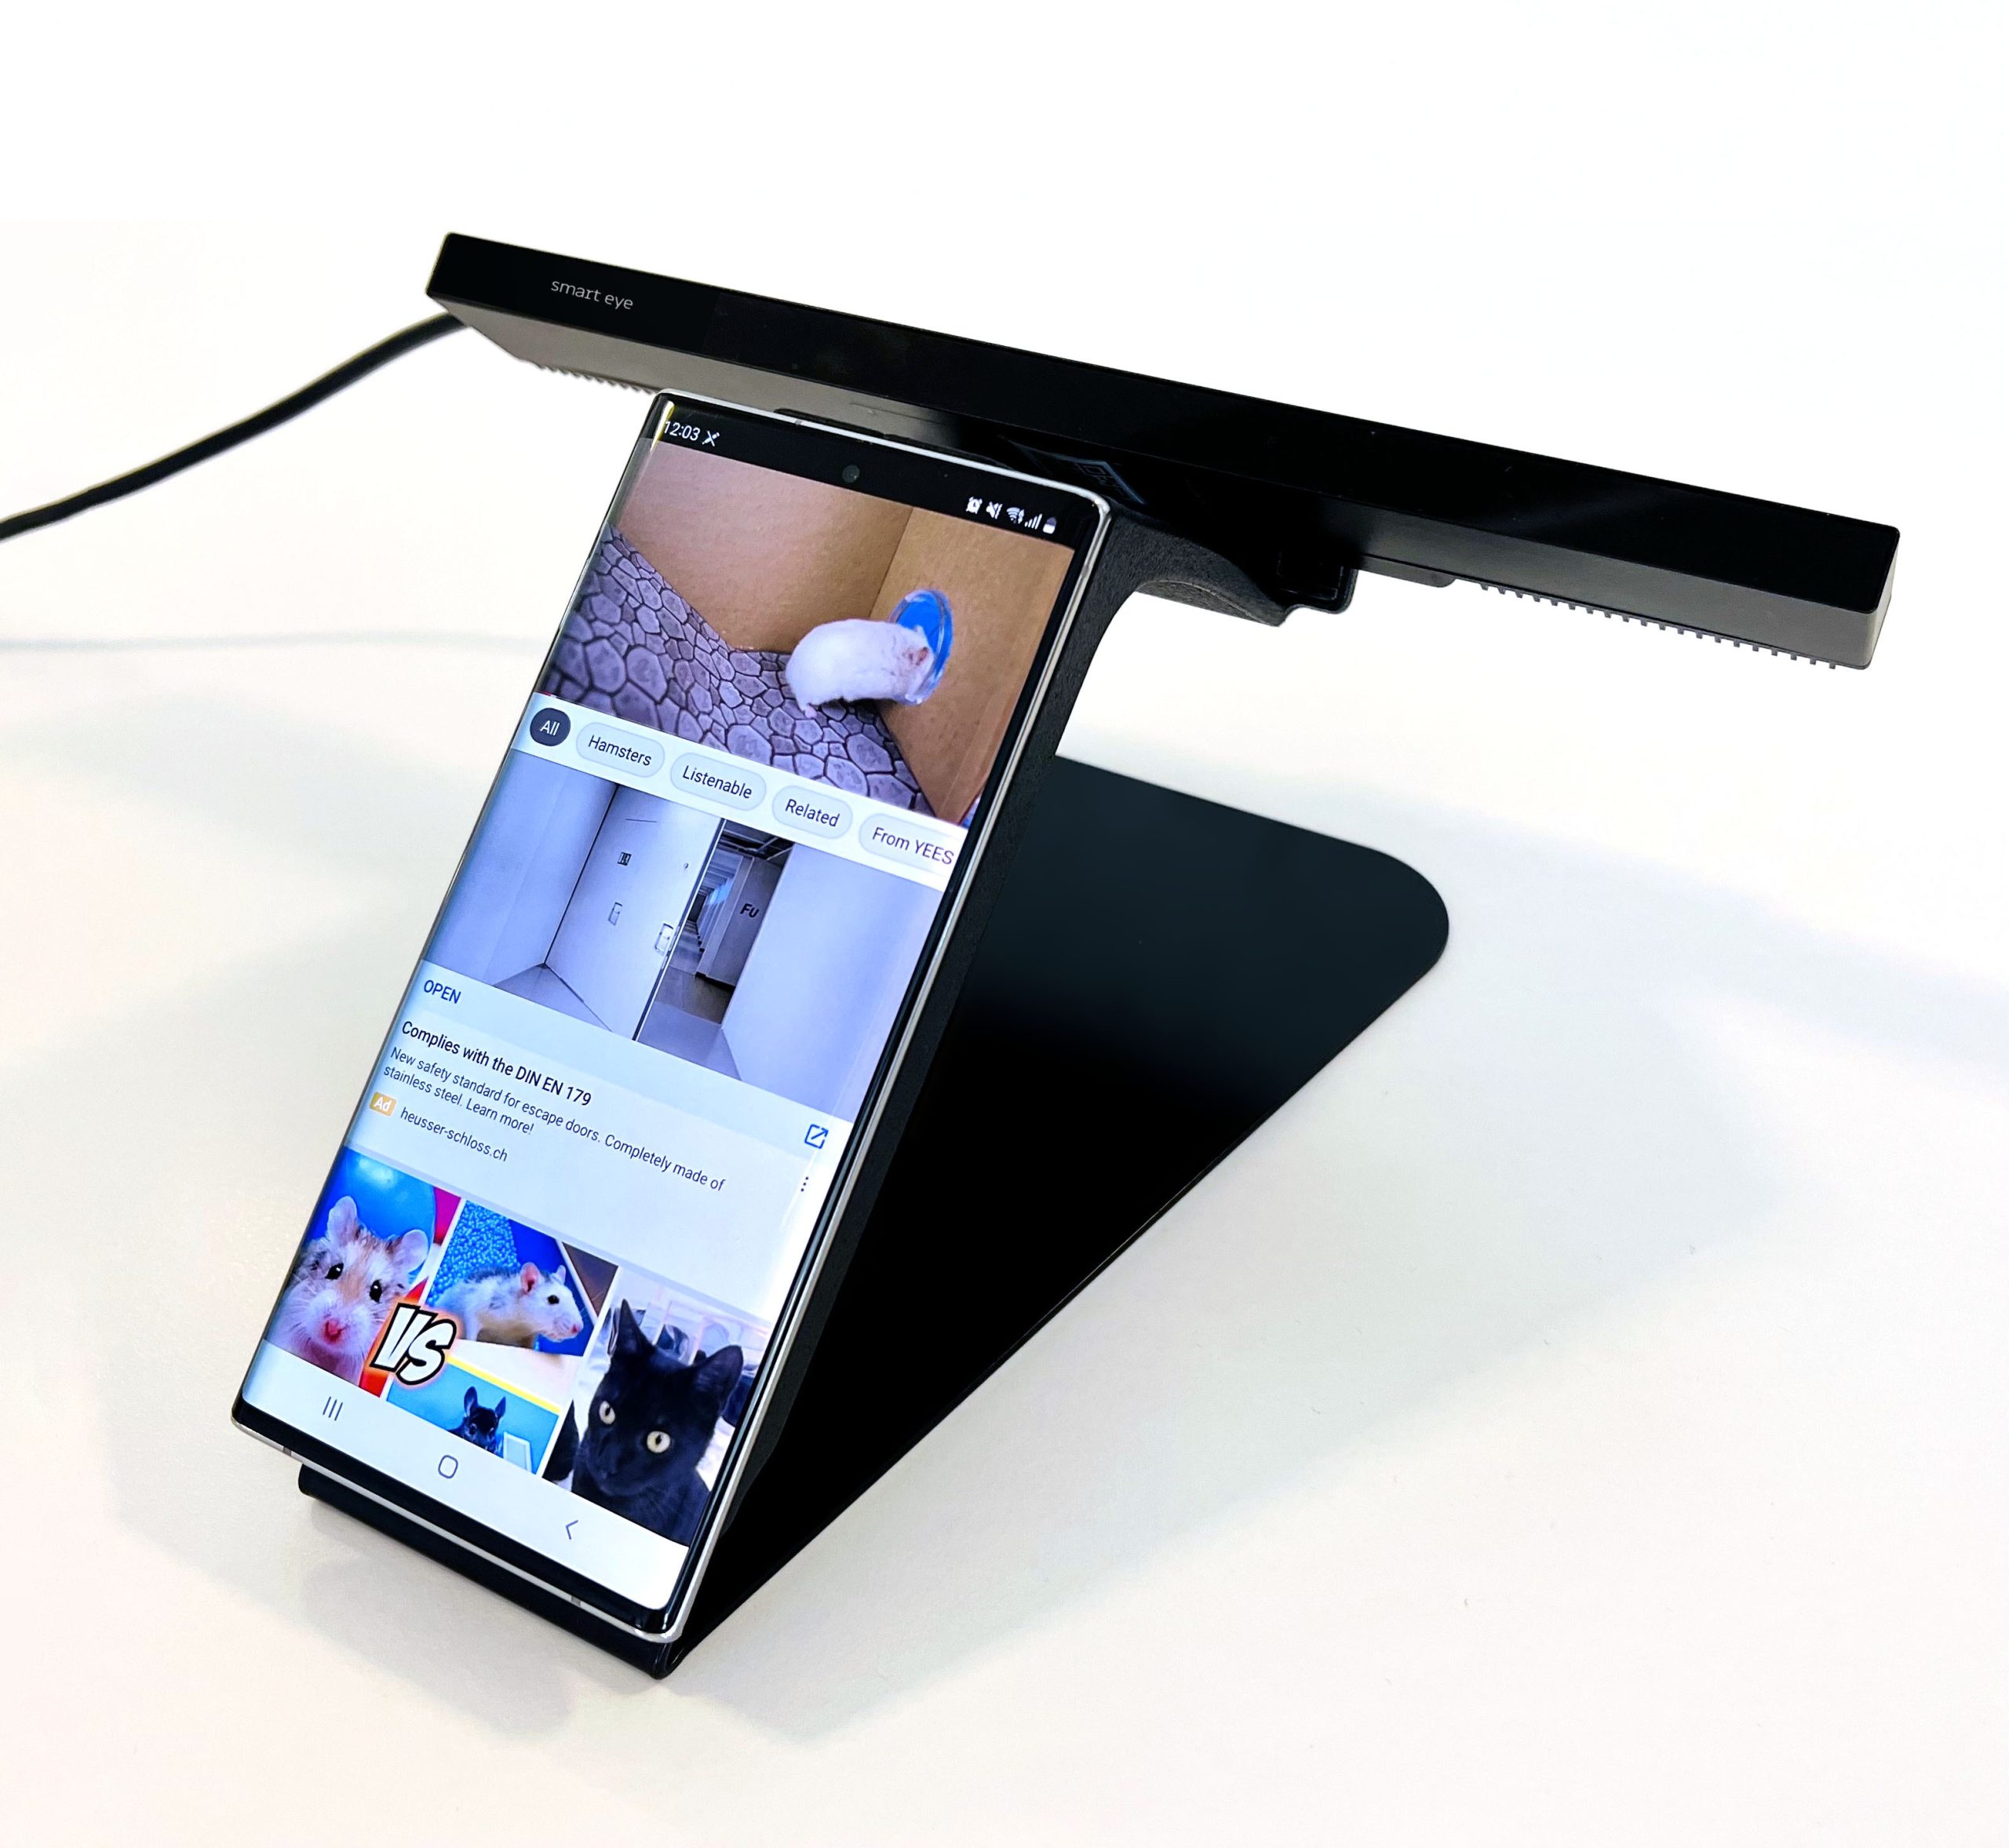 Mobile Stand